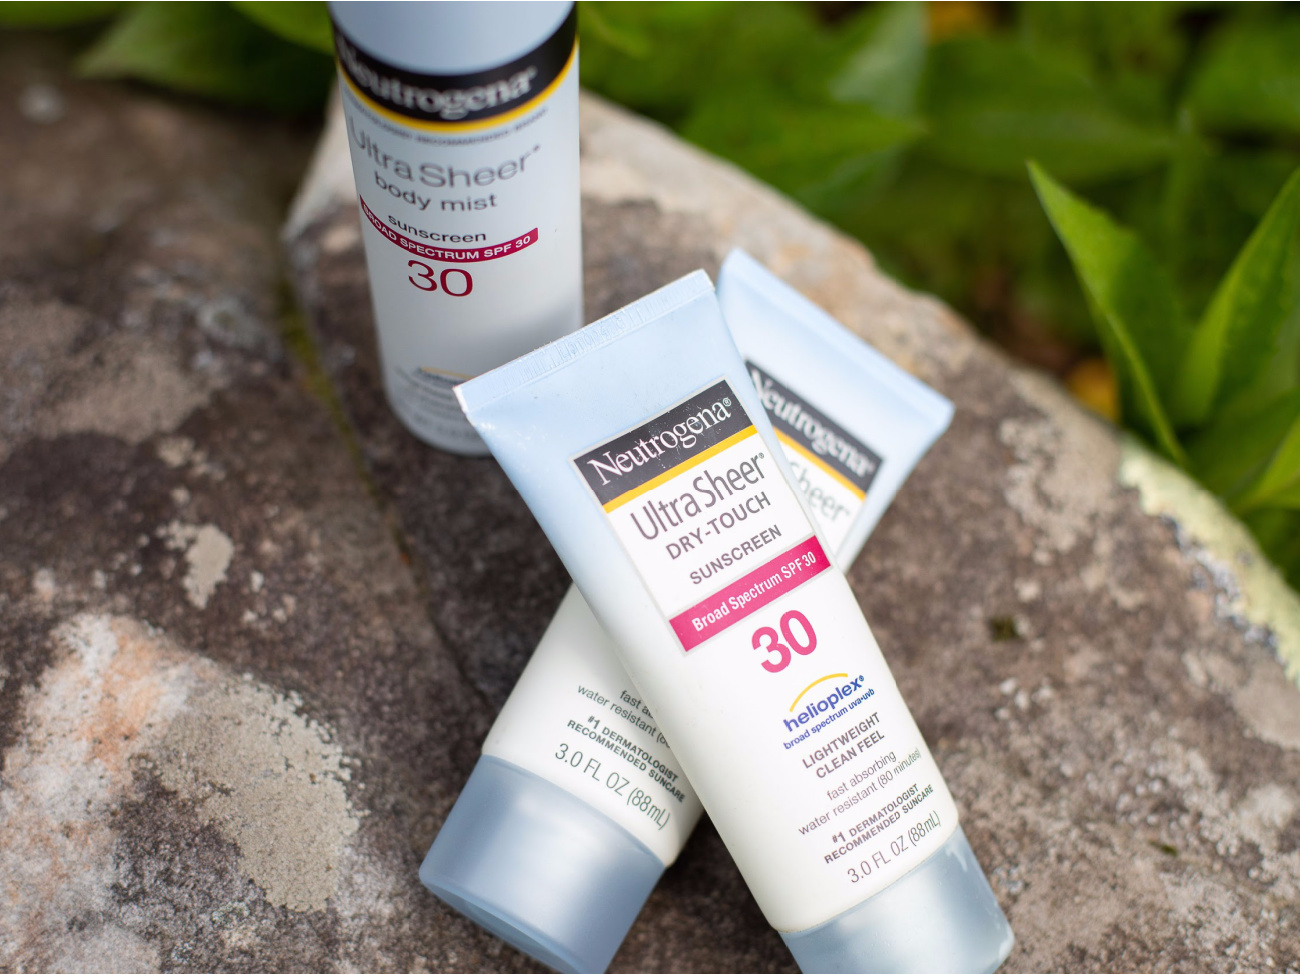 Neutrogena Sun Care Products As Low As $5.99 At Kroger (Regular Price Up To $11.49)